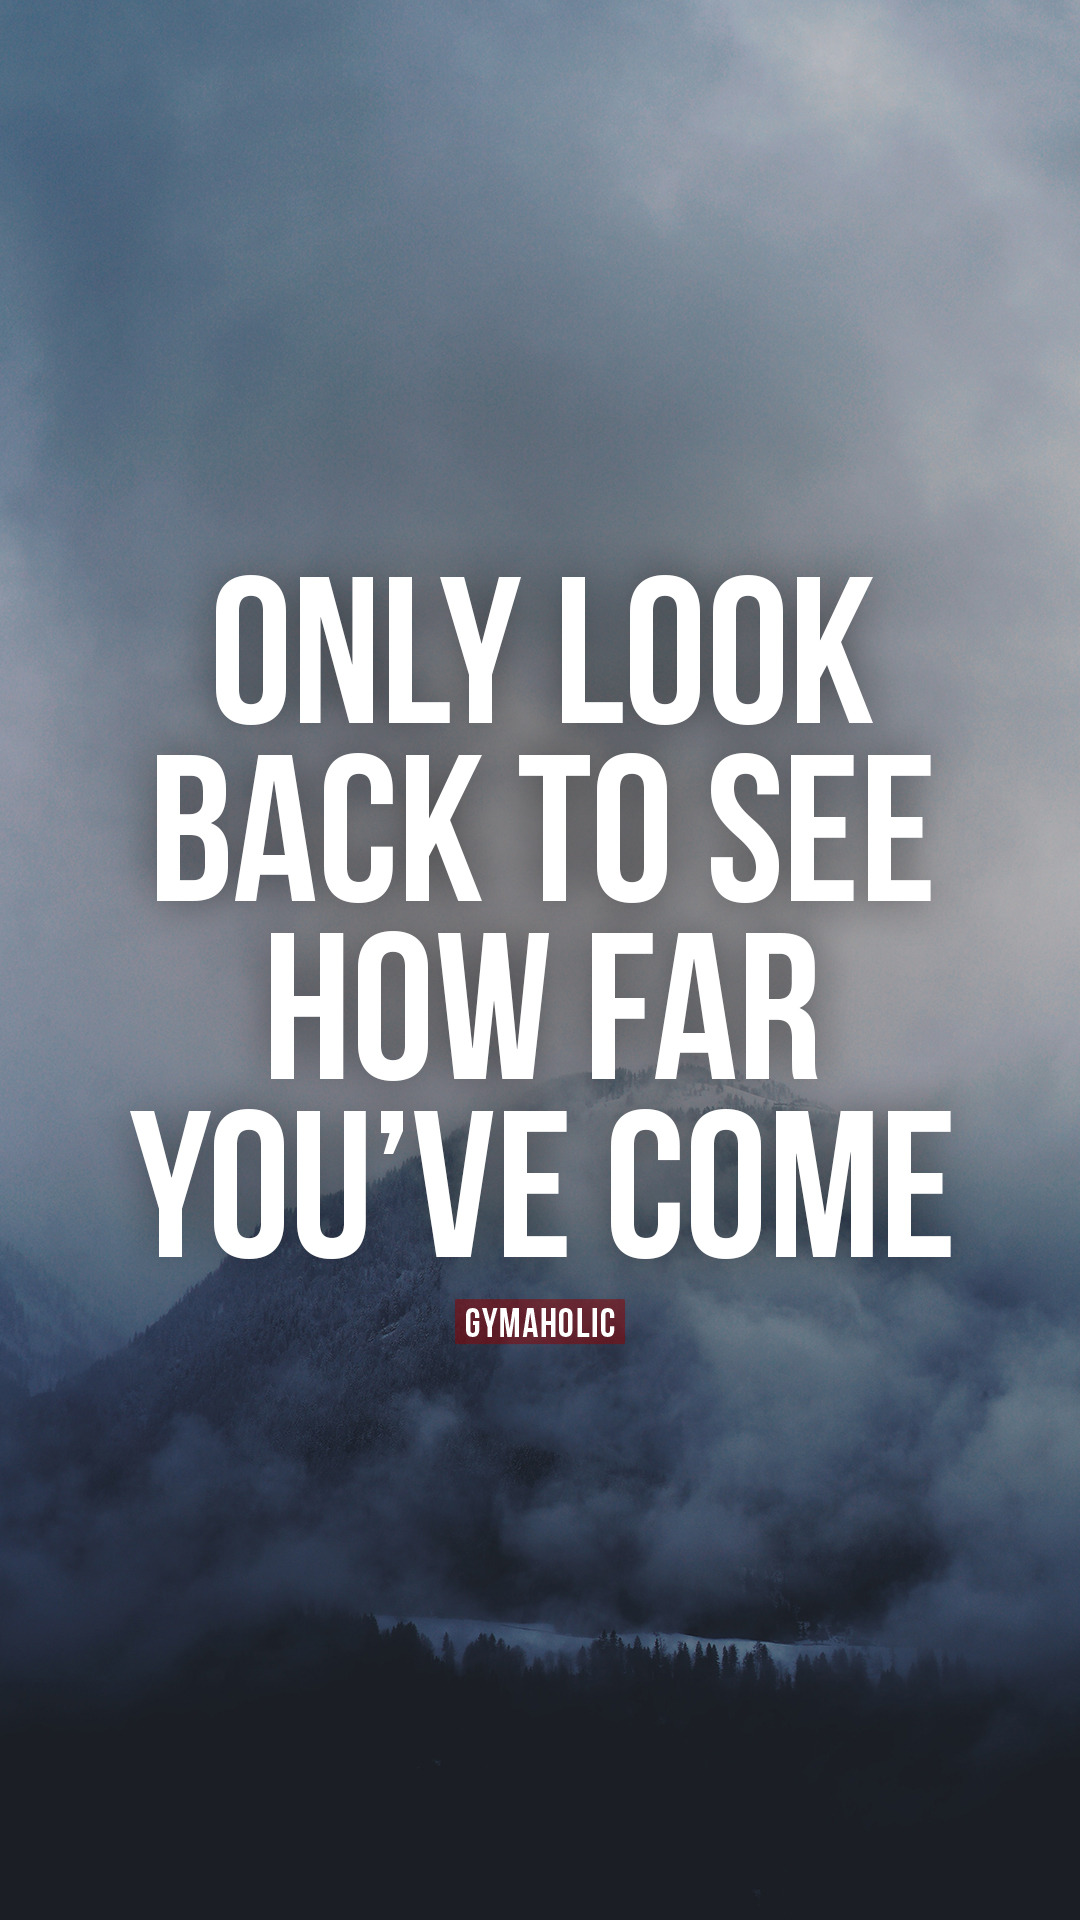 Only look back to see how far you've come - Gymaholic